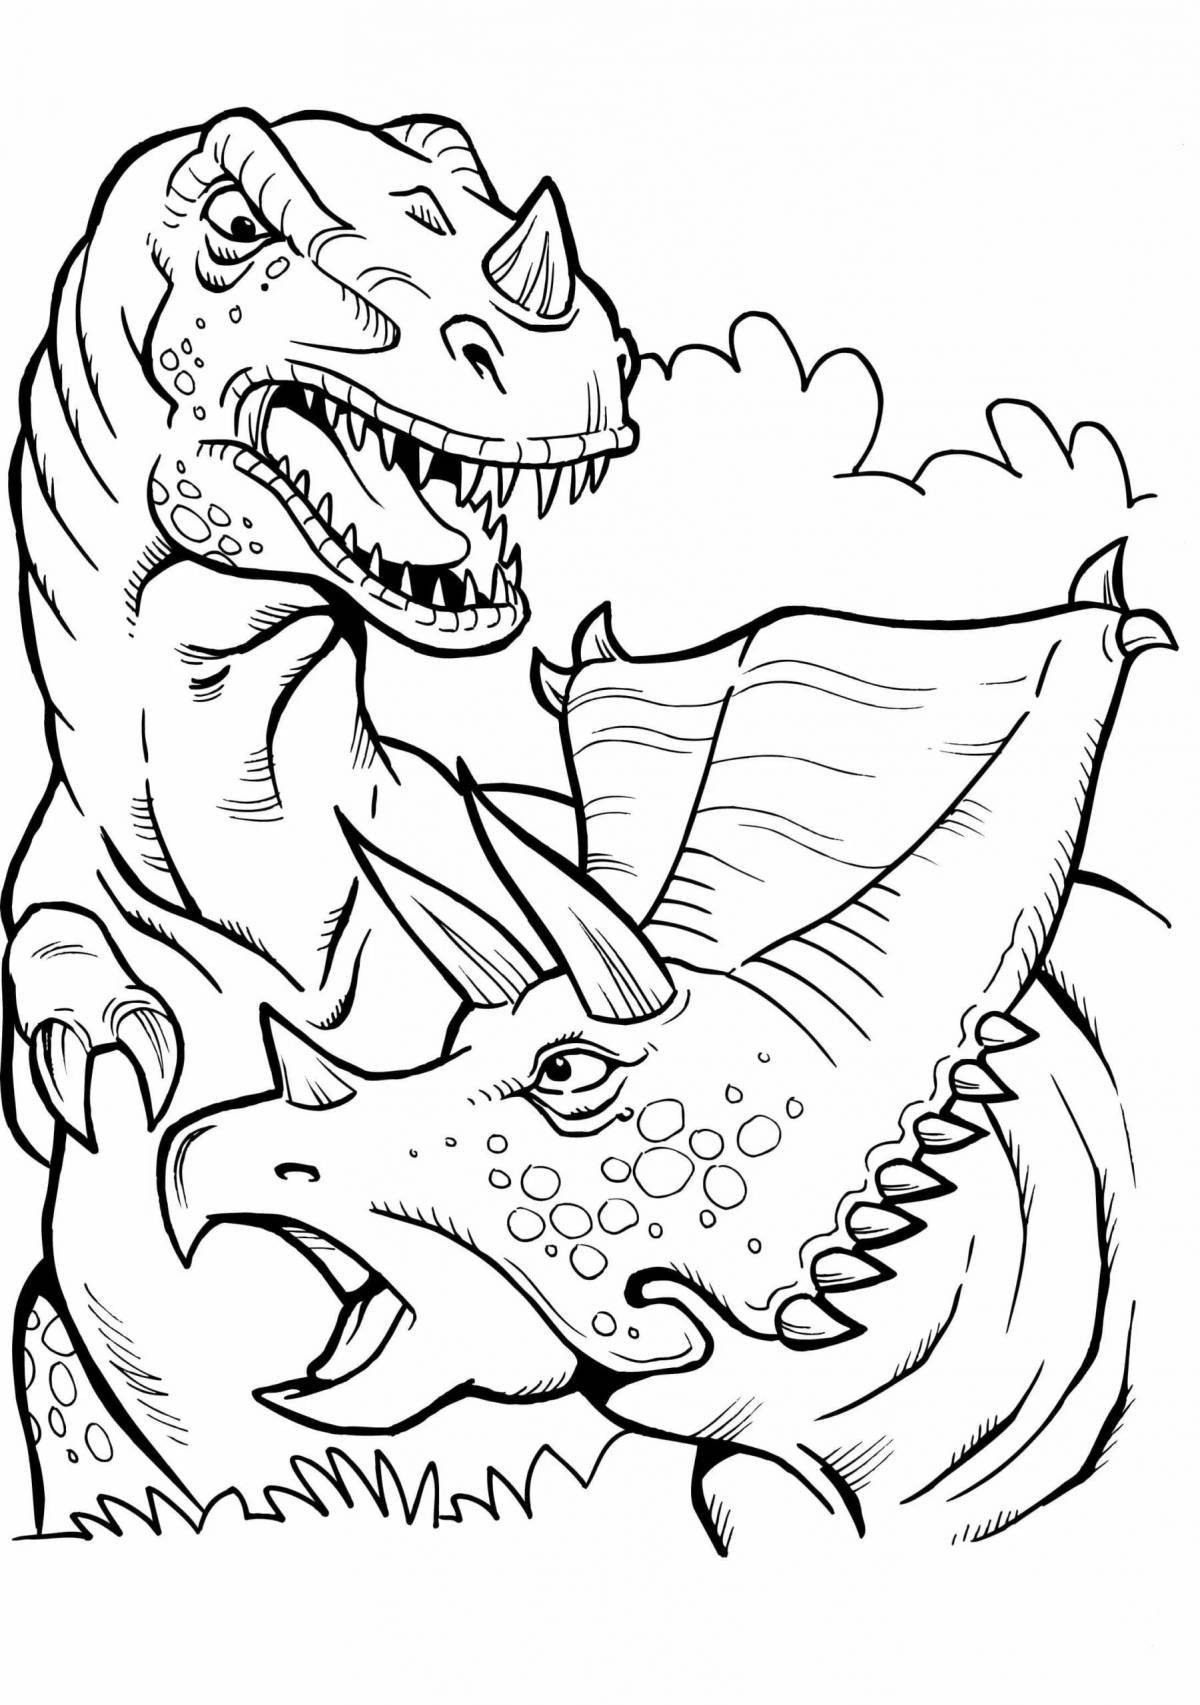 Indominus rex coloring book for kids